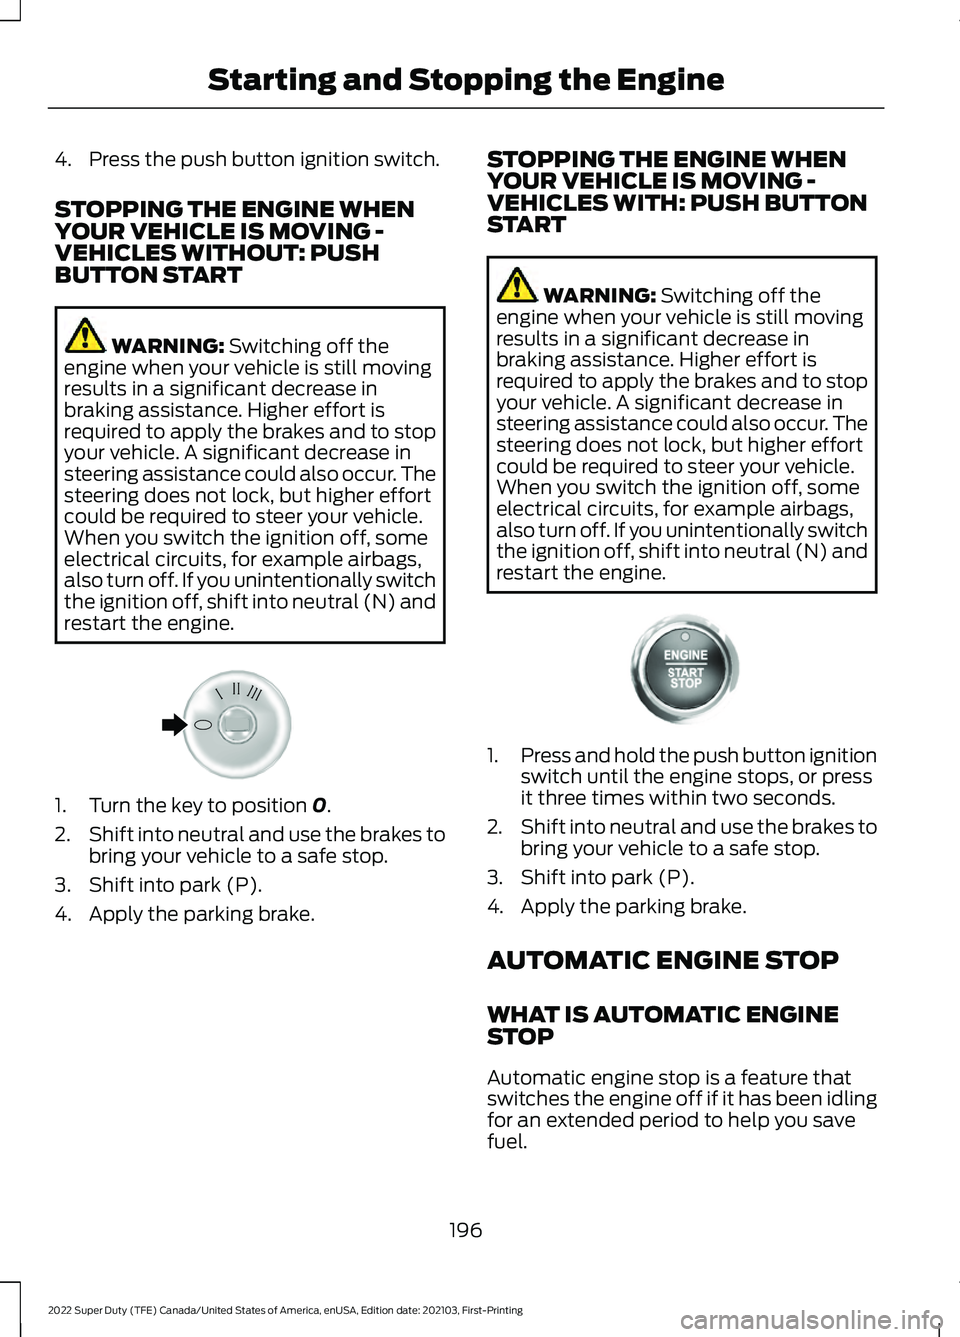 FORD F-350 2022  Owners Manual 4. Press the push button ignition switch.
STOPPING THE ENGINE WHEN
YOUR VEHICLE IS MOVING -
VEHICLES WITHOUT: PUSH
BUTTON START
WARNING: Switching off the
engine when your vehicle is still moving
resu